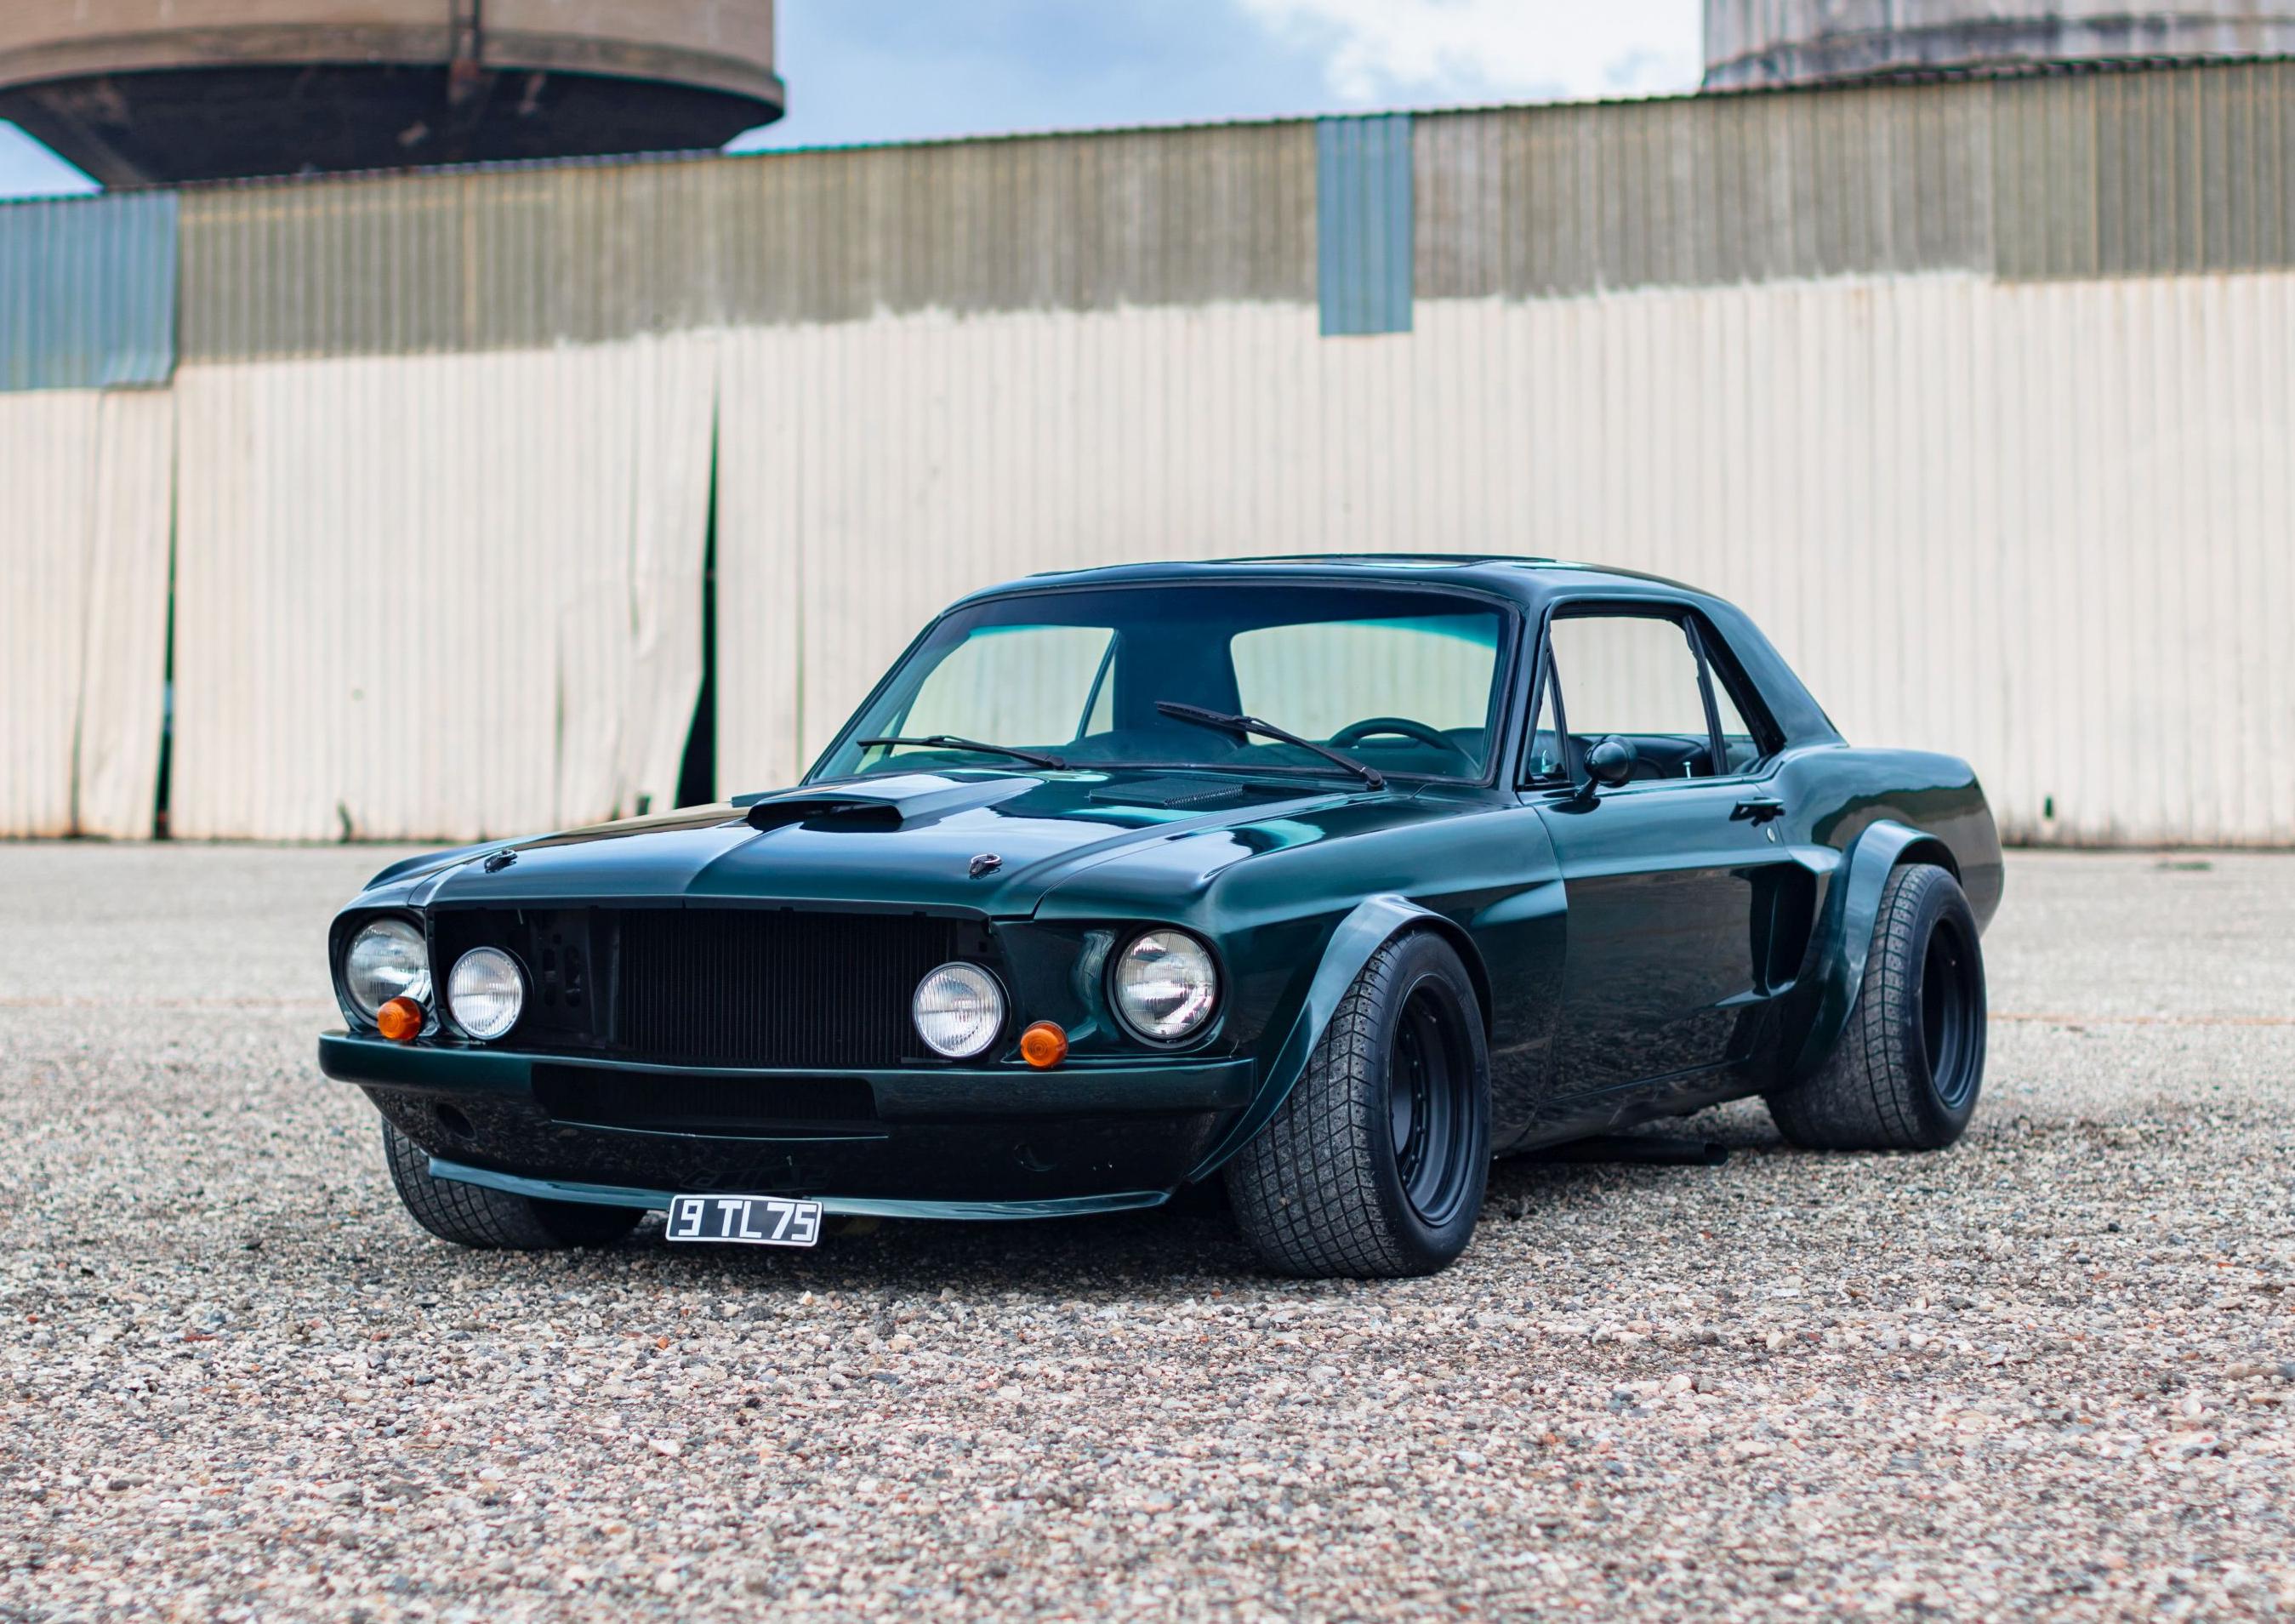 The Bullitt Mustang Inspired It, but Belmondo's 1967 Ford Mustang Has Become an Icon All Its Own